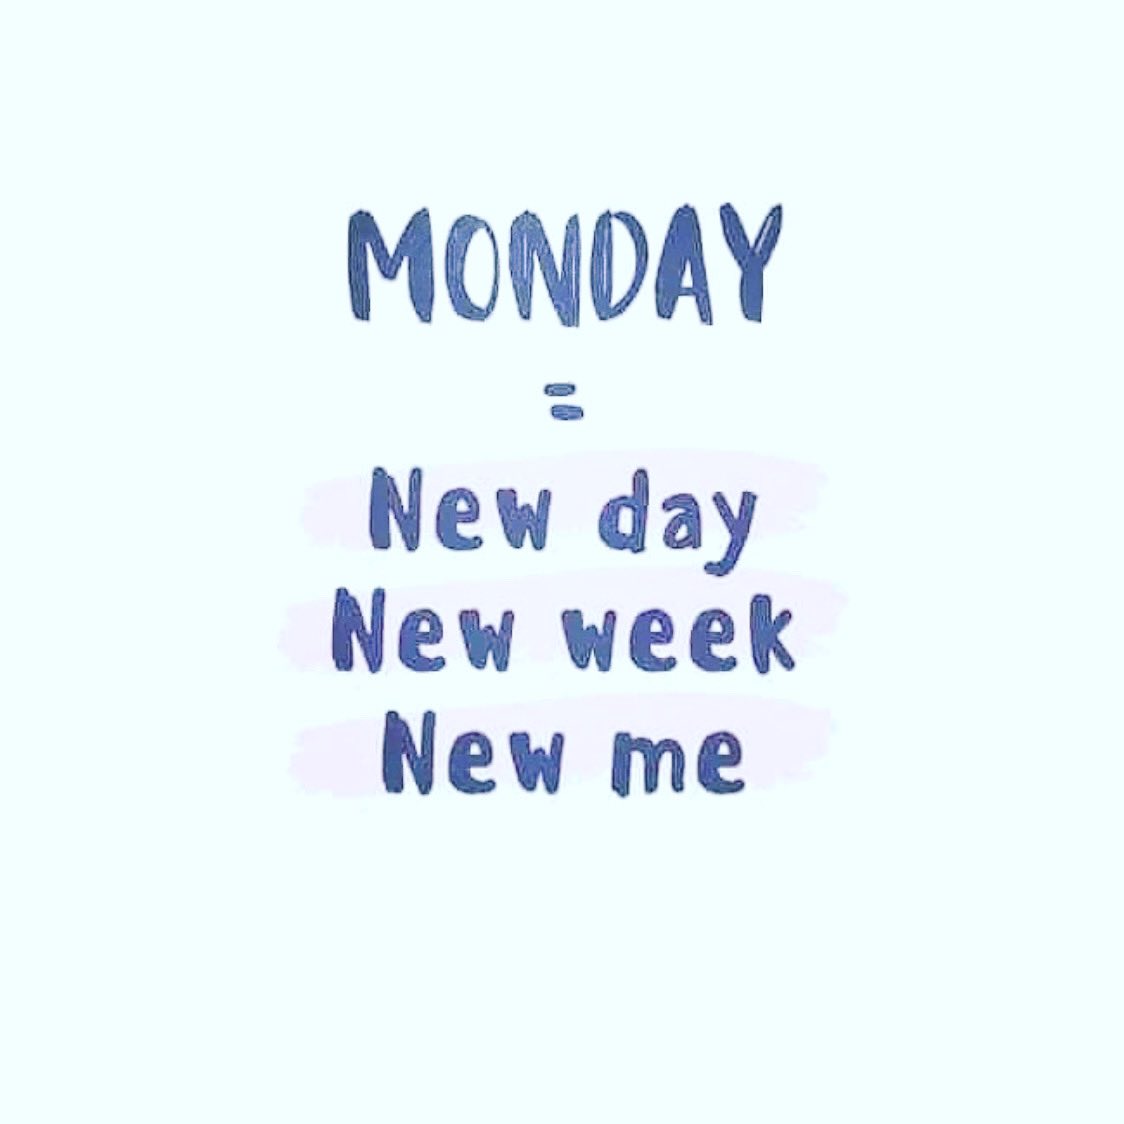 #happymonday #happynewweek. Good time to set some new #goals. The lighter days are here, great time for some #positiveaction. Have a fab week 🧡